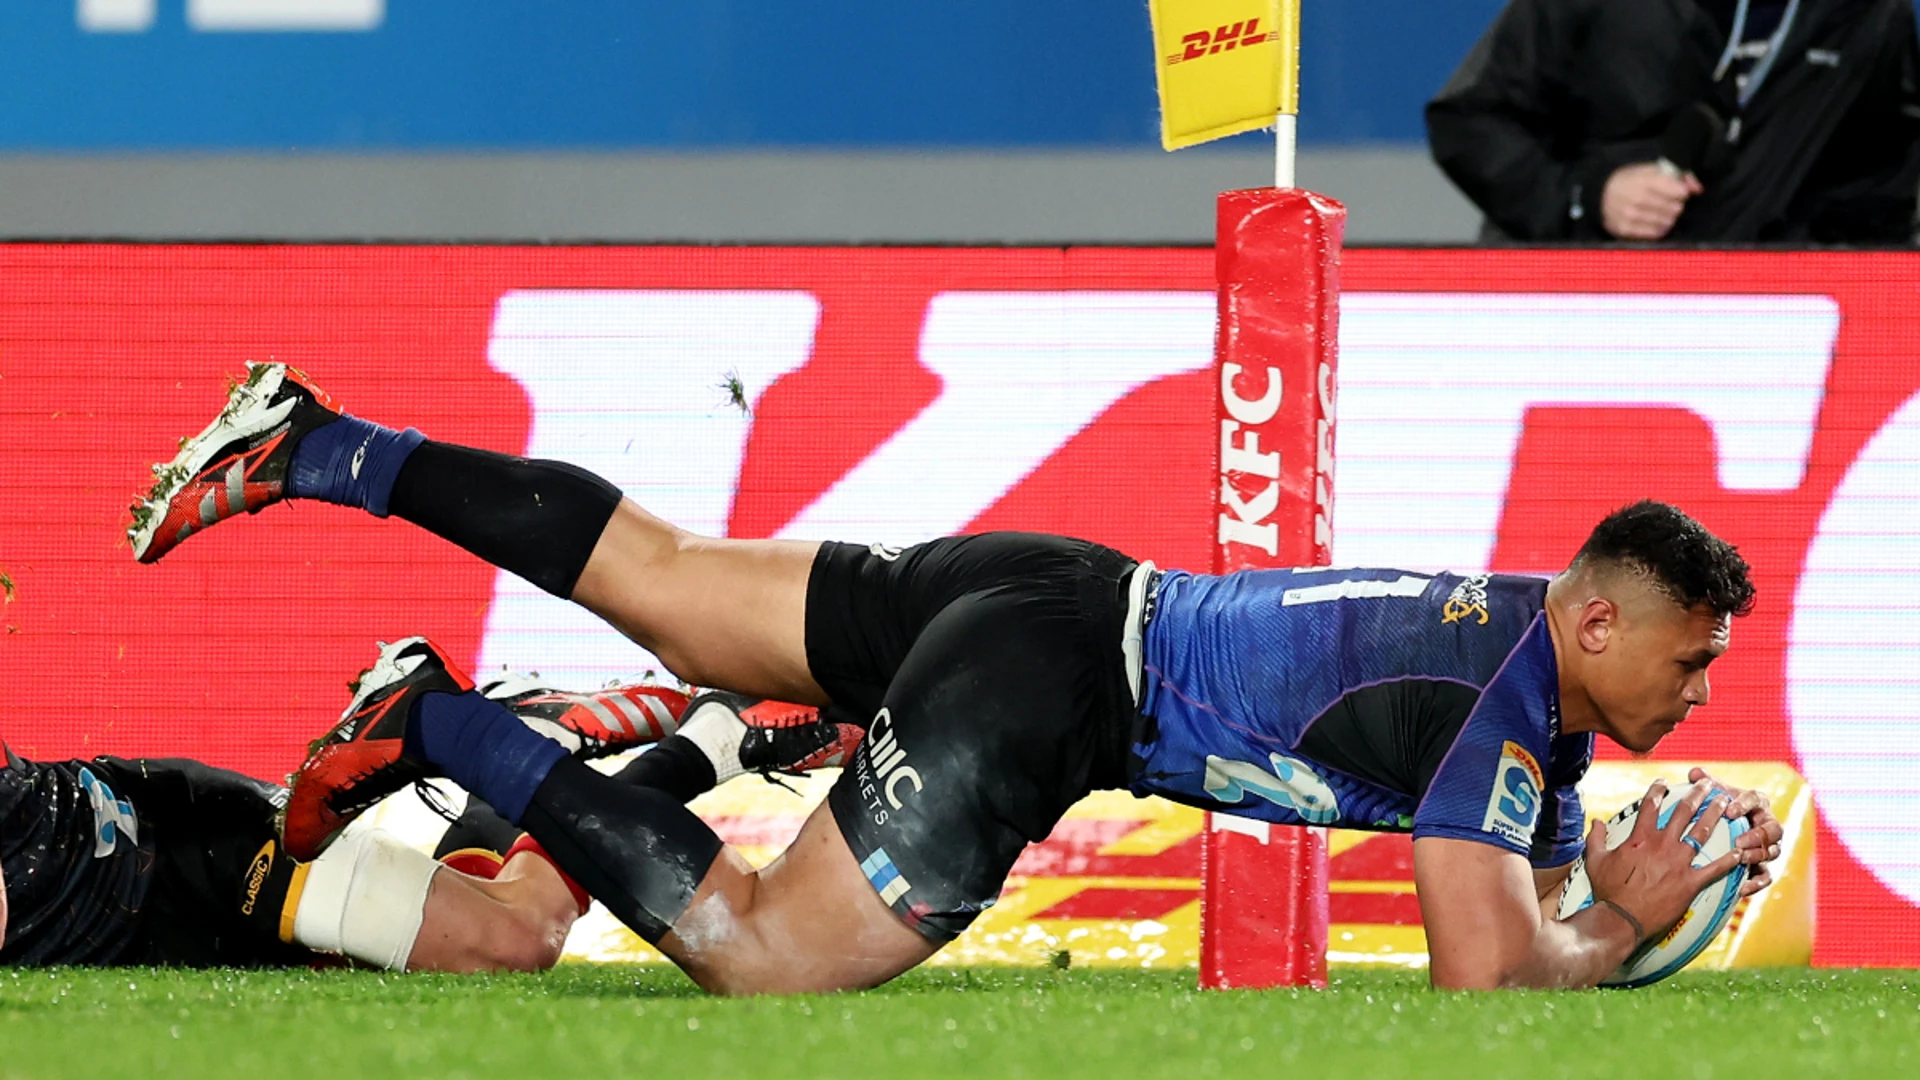 Blues crush Chiefs to win Super Rugby final